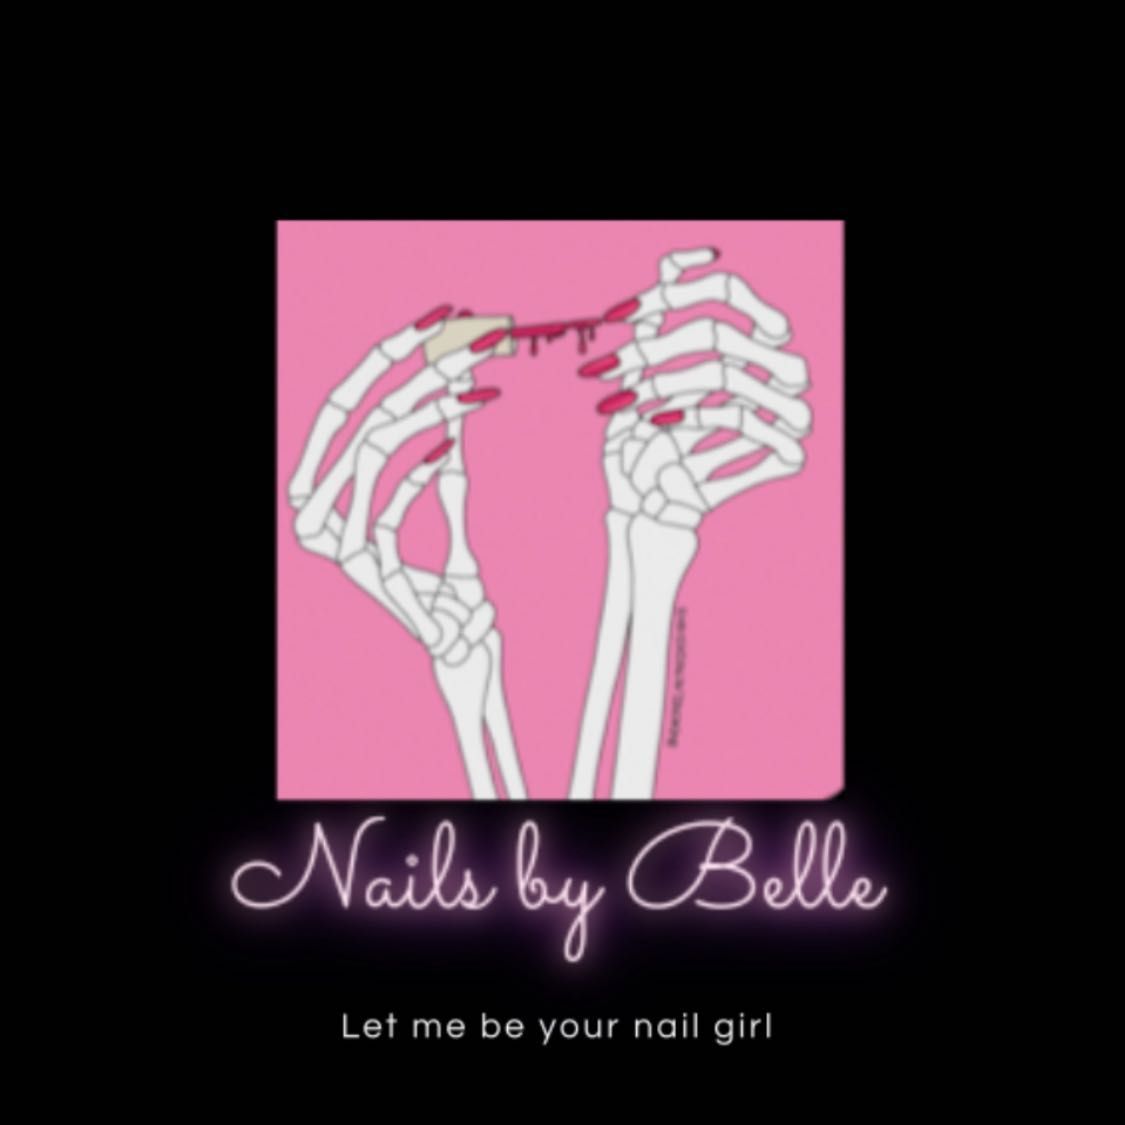 Nails by Belle💗, 6305 Yucca St, Los Angeles, 90028